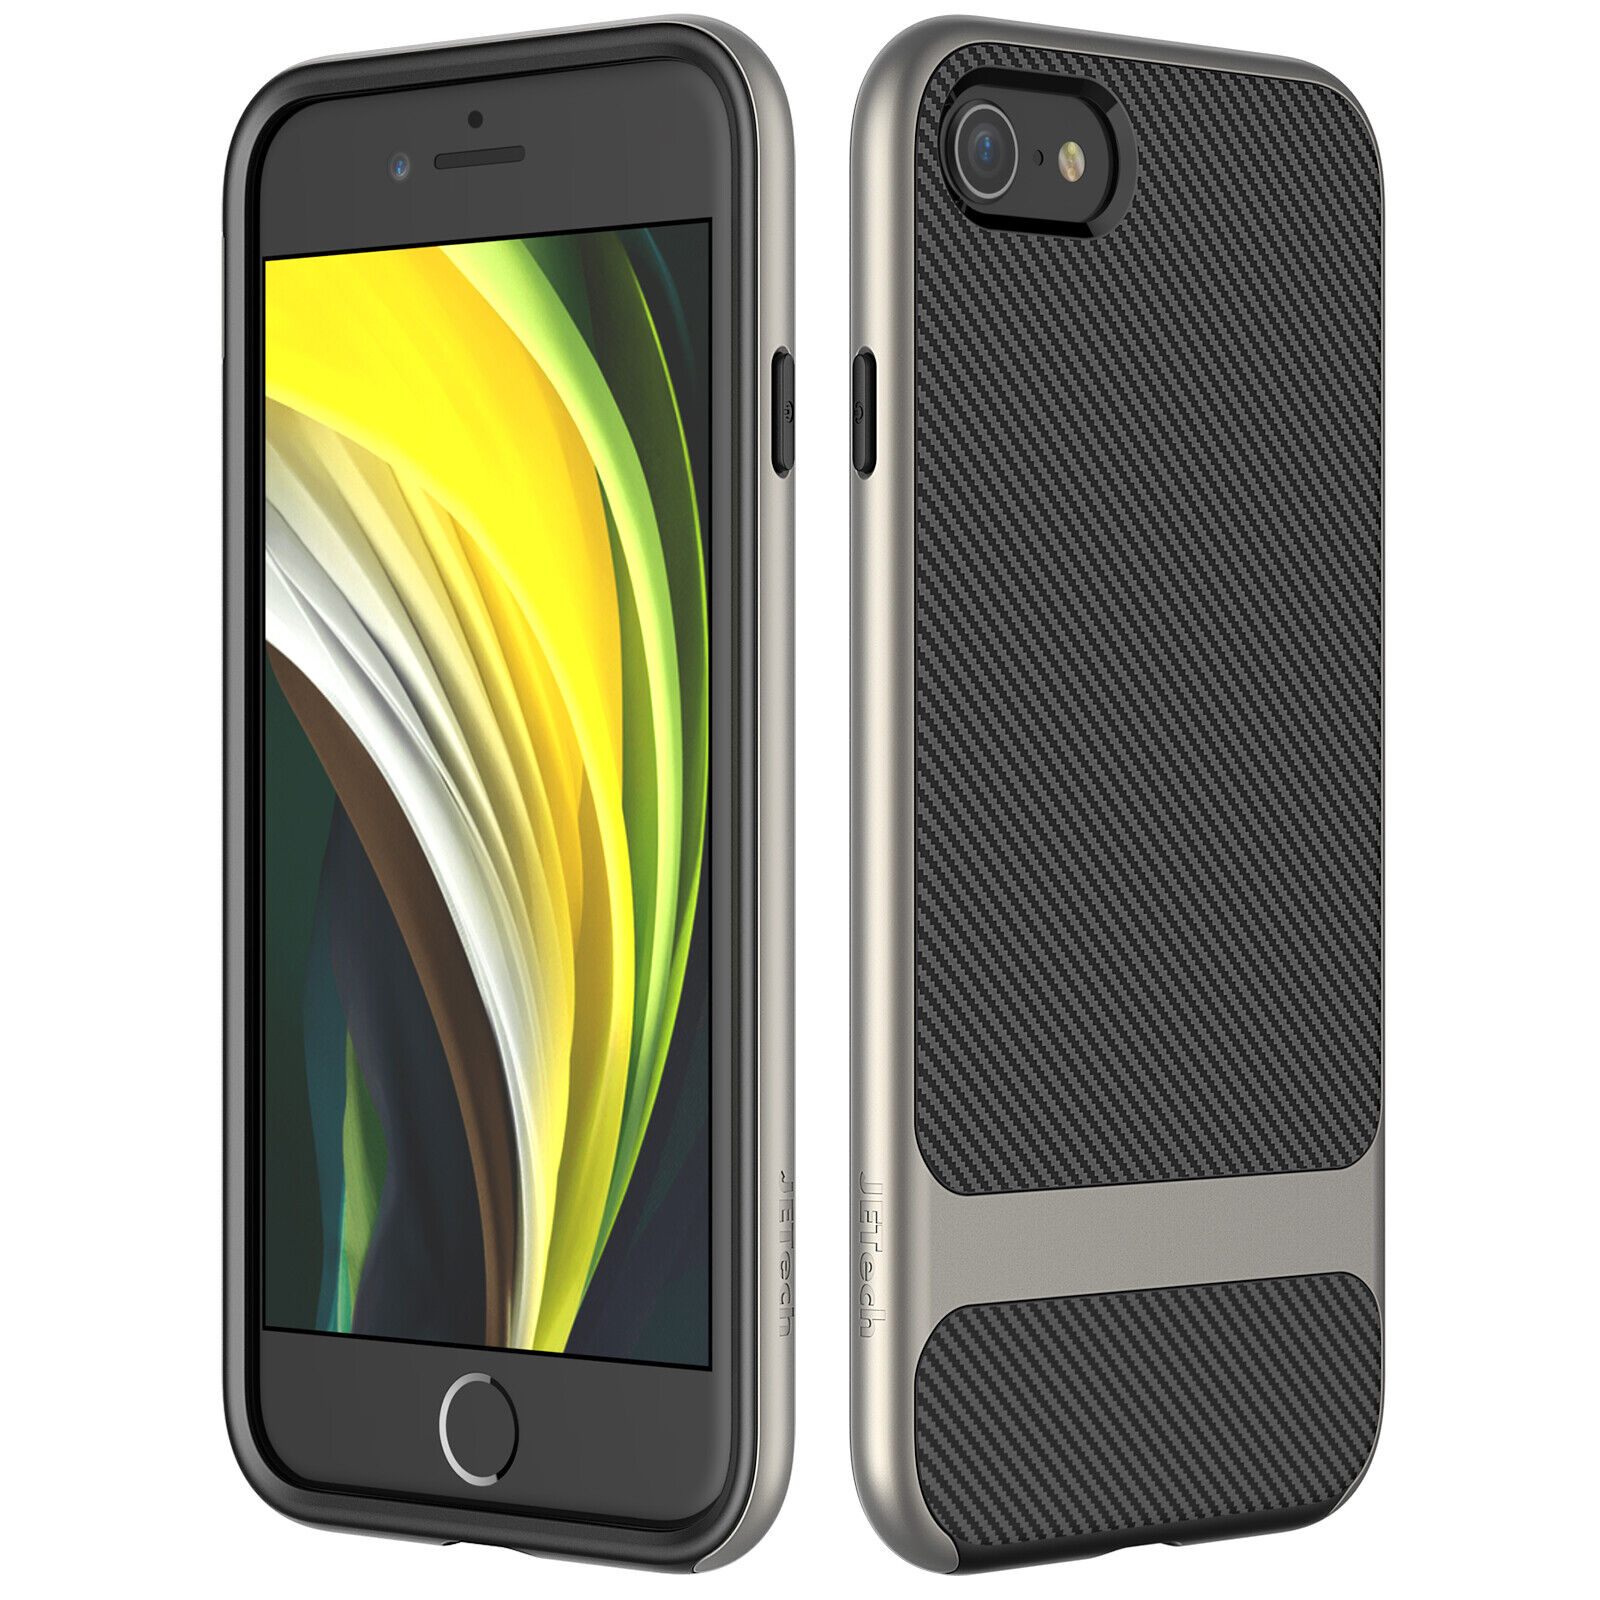 JETech Case for iPhone SE 2020/8/7 4.7-Inch 2-Layer Slim Carbon Fiber Cover Grey